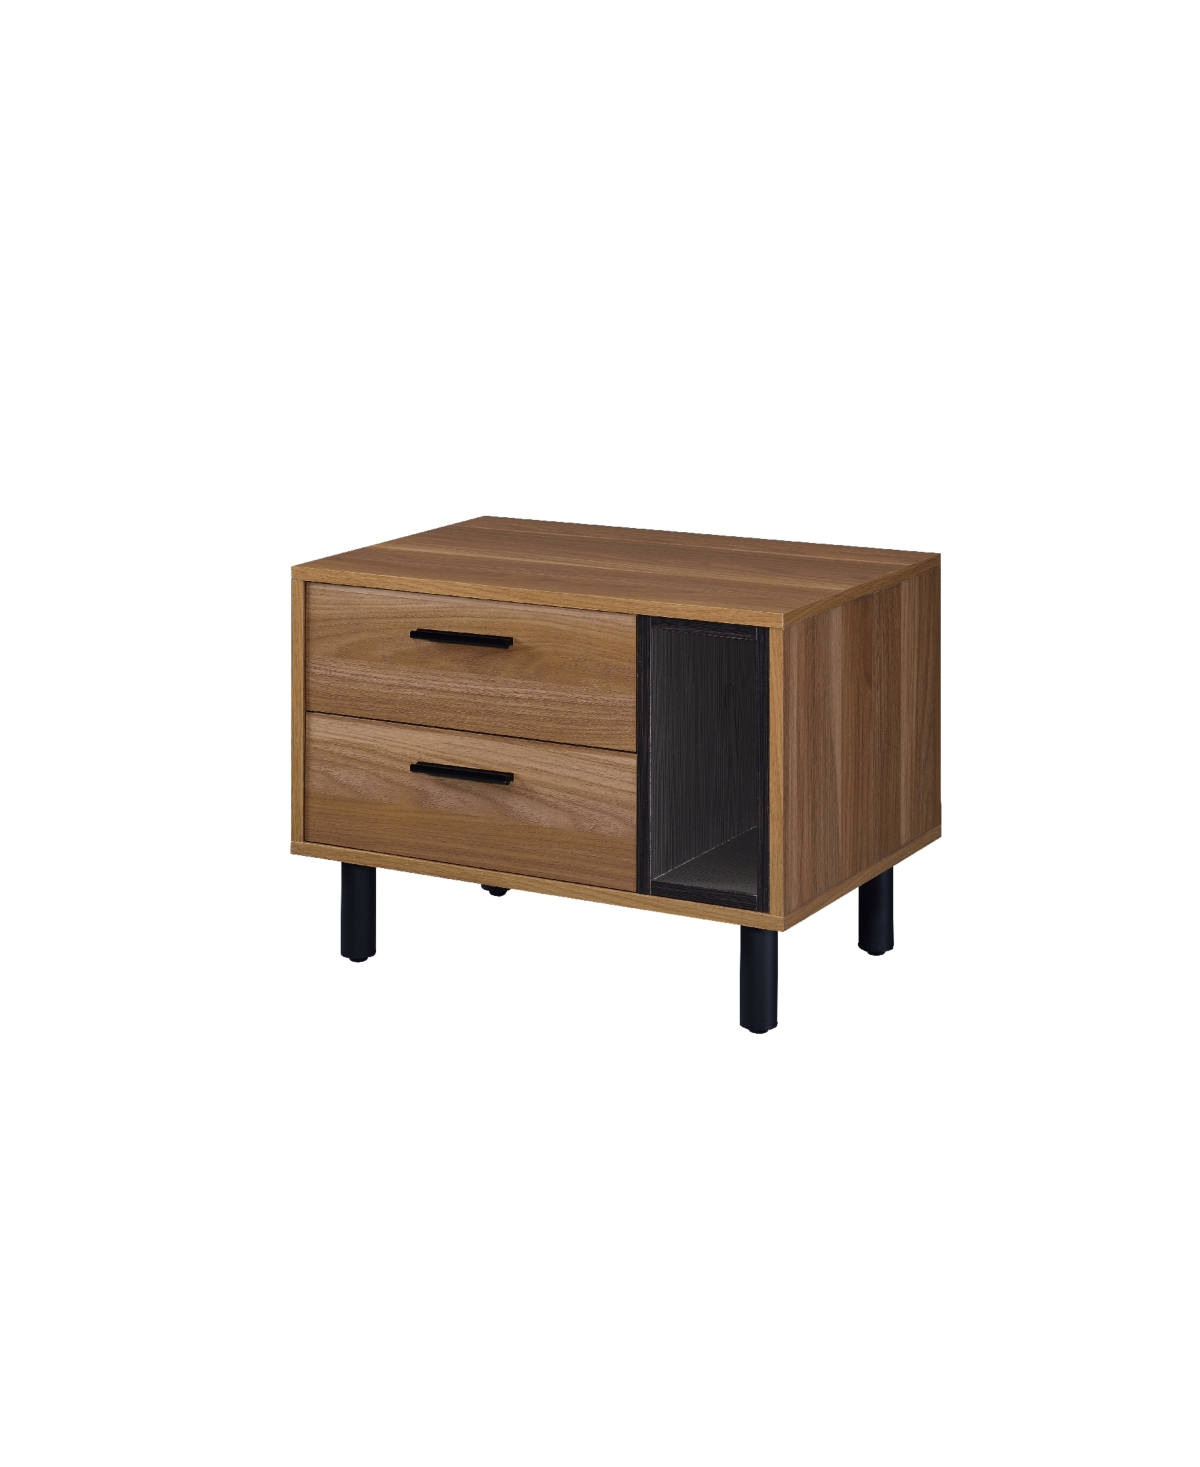 Acme Furniture Trolgar Accent Table In Brown Oak And Black Finish